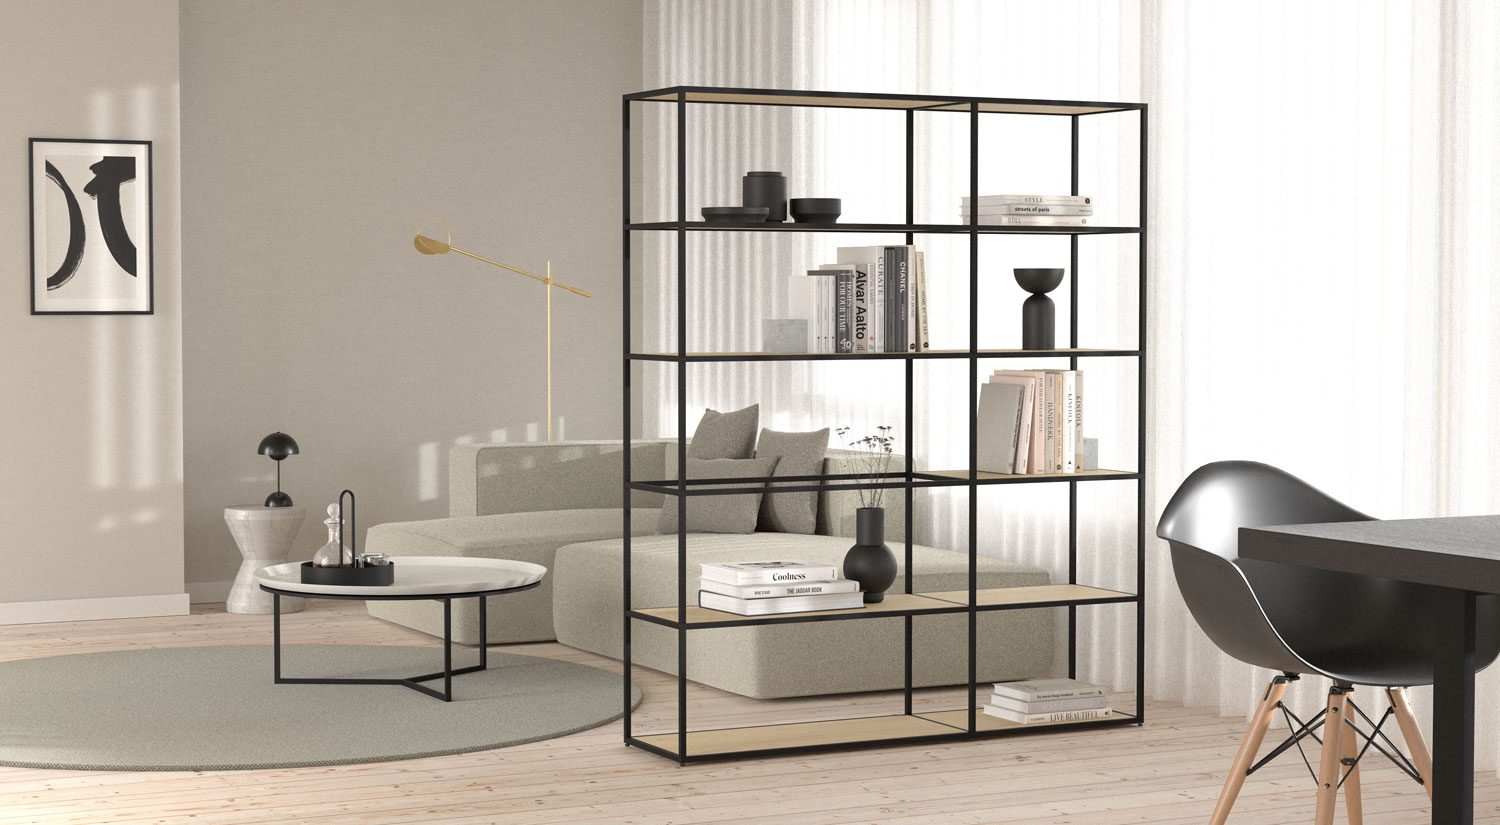 30 Freestanding Shelving Systems That Double As Room Dividers - Vurni   Wooden room dividers, Freestanding room divider, Hanging room dividers